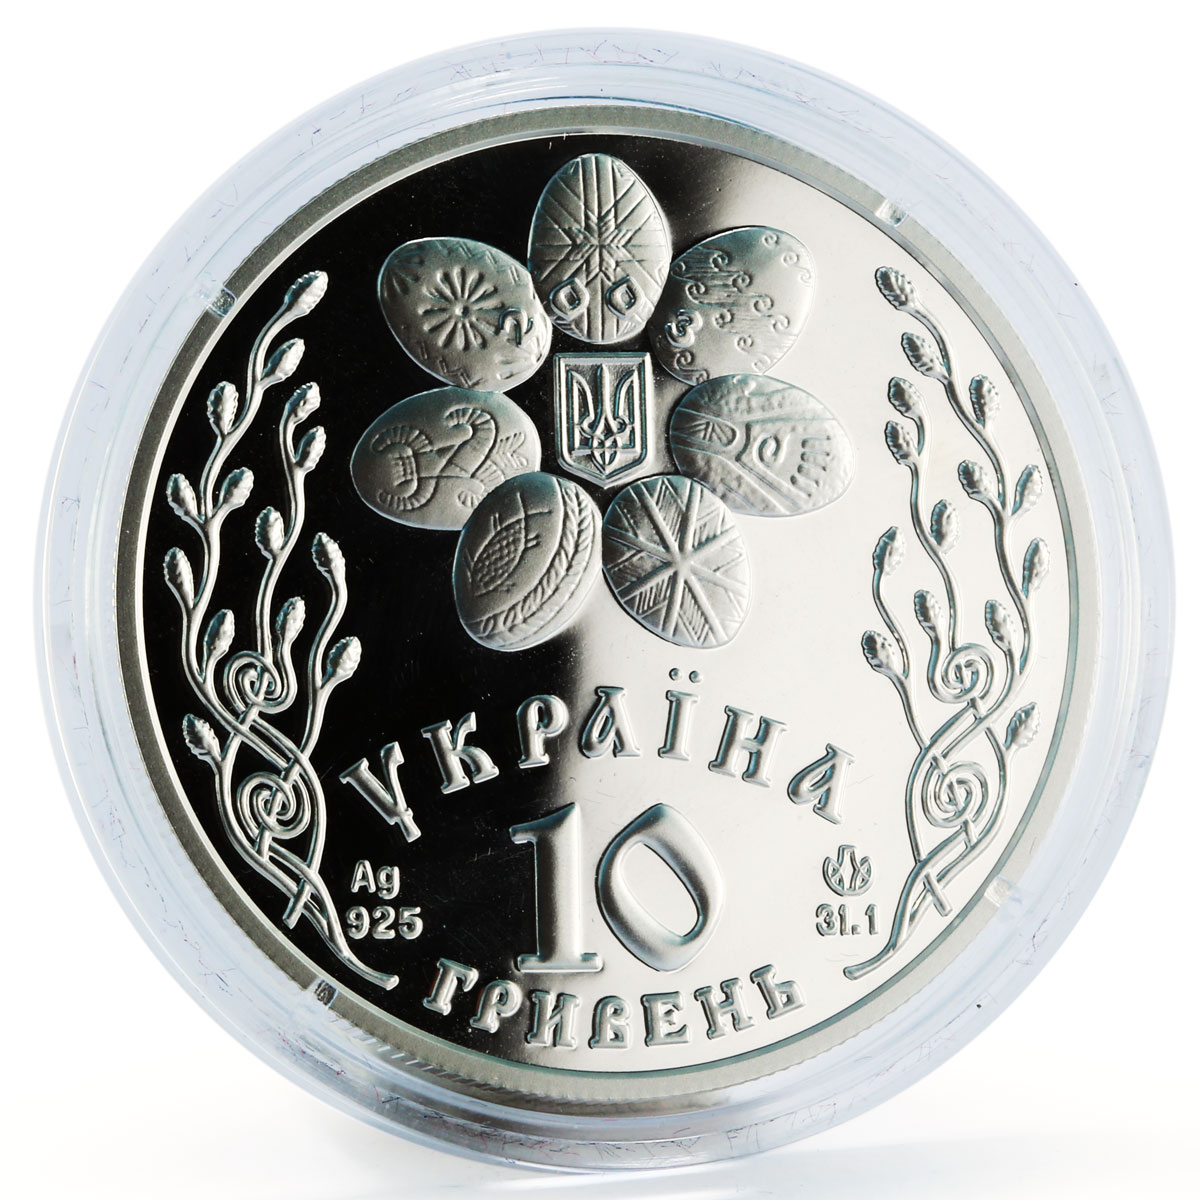 Ukraine 10 hryvnia Celebration of Easter Holiday proof silver coin 2003